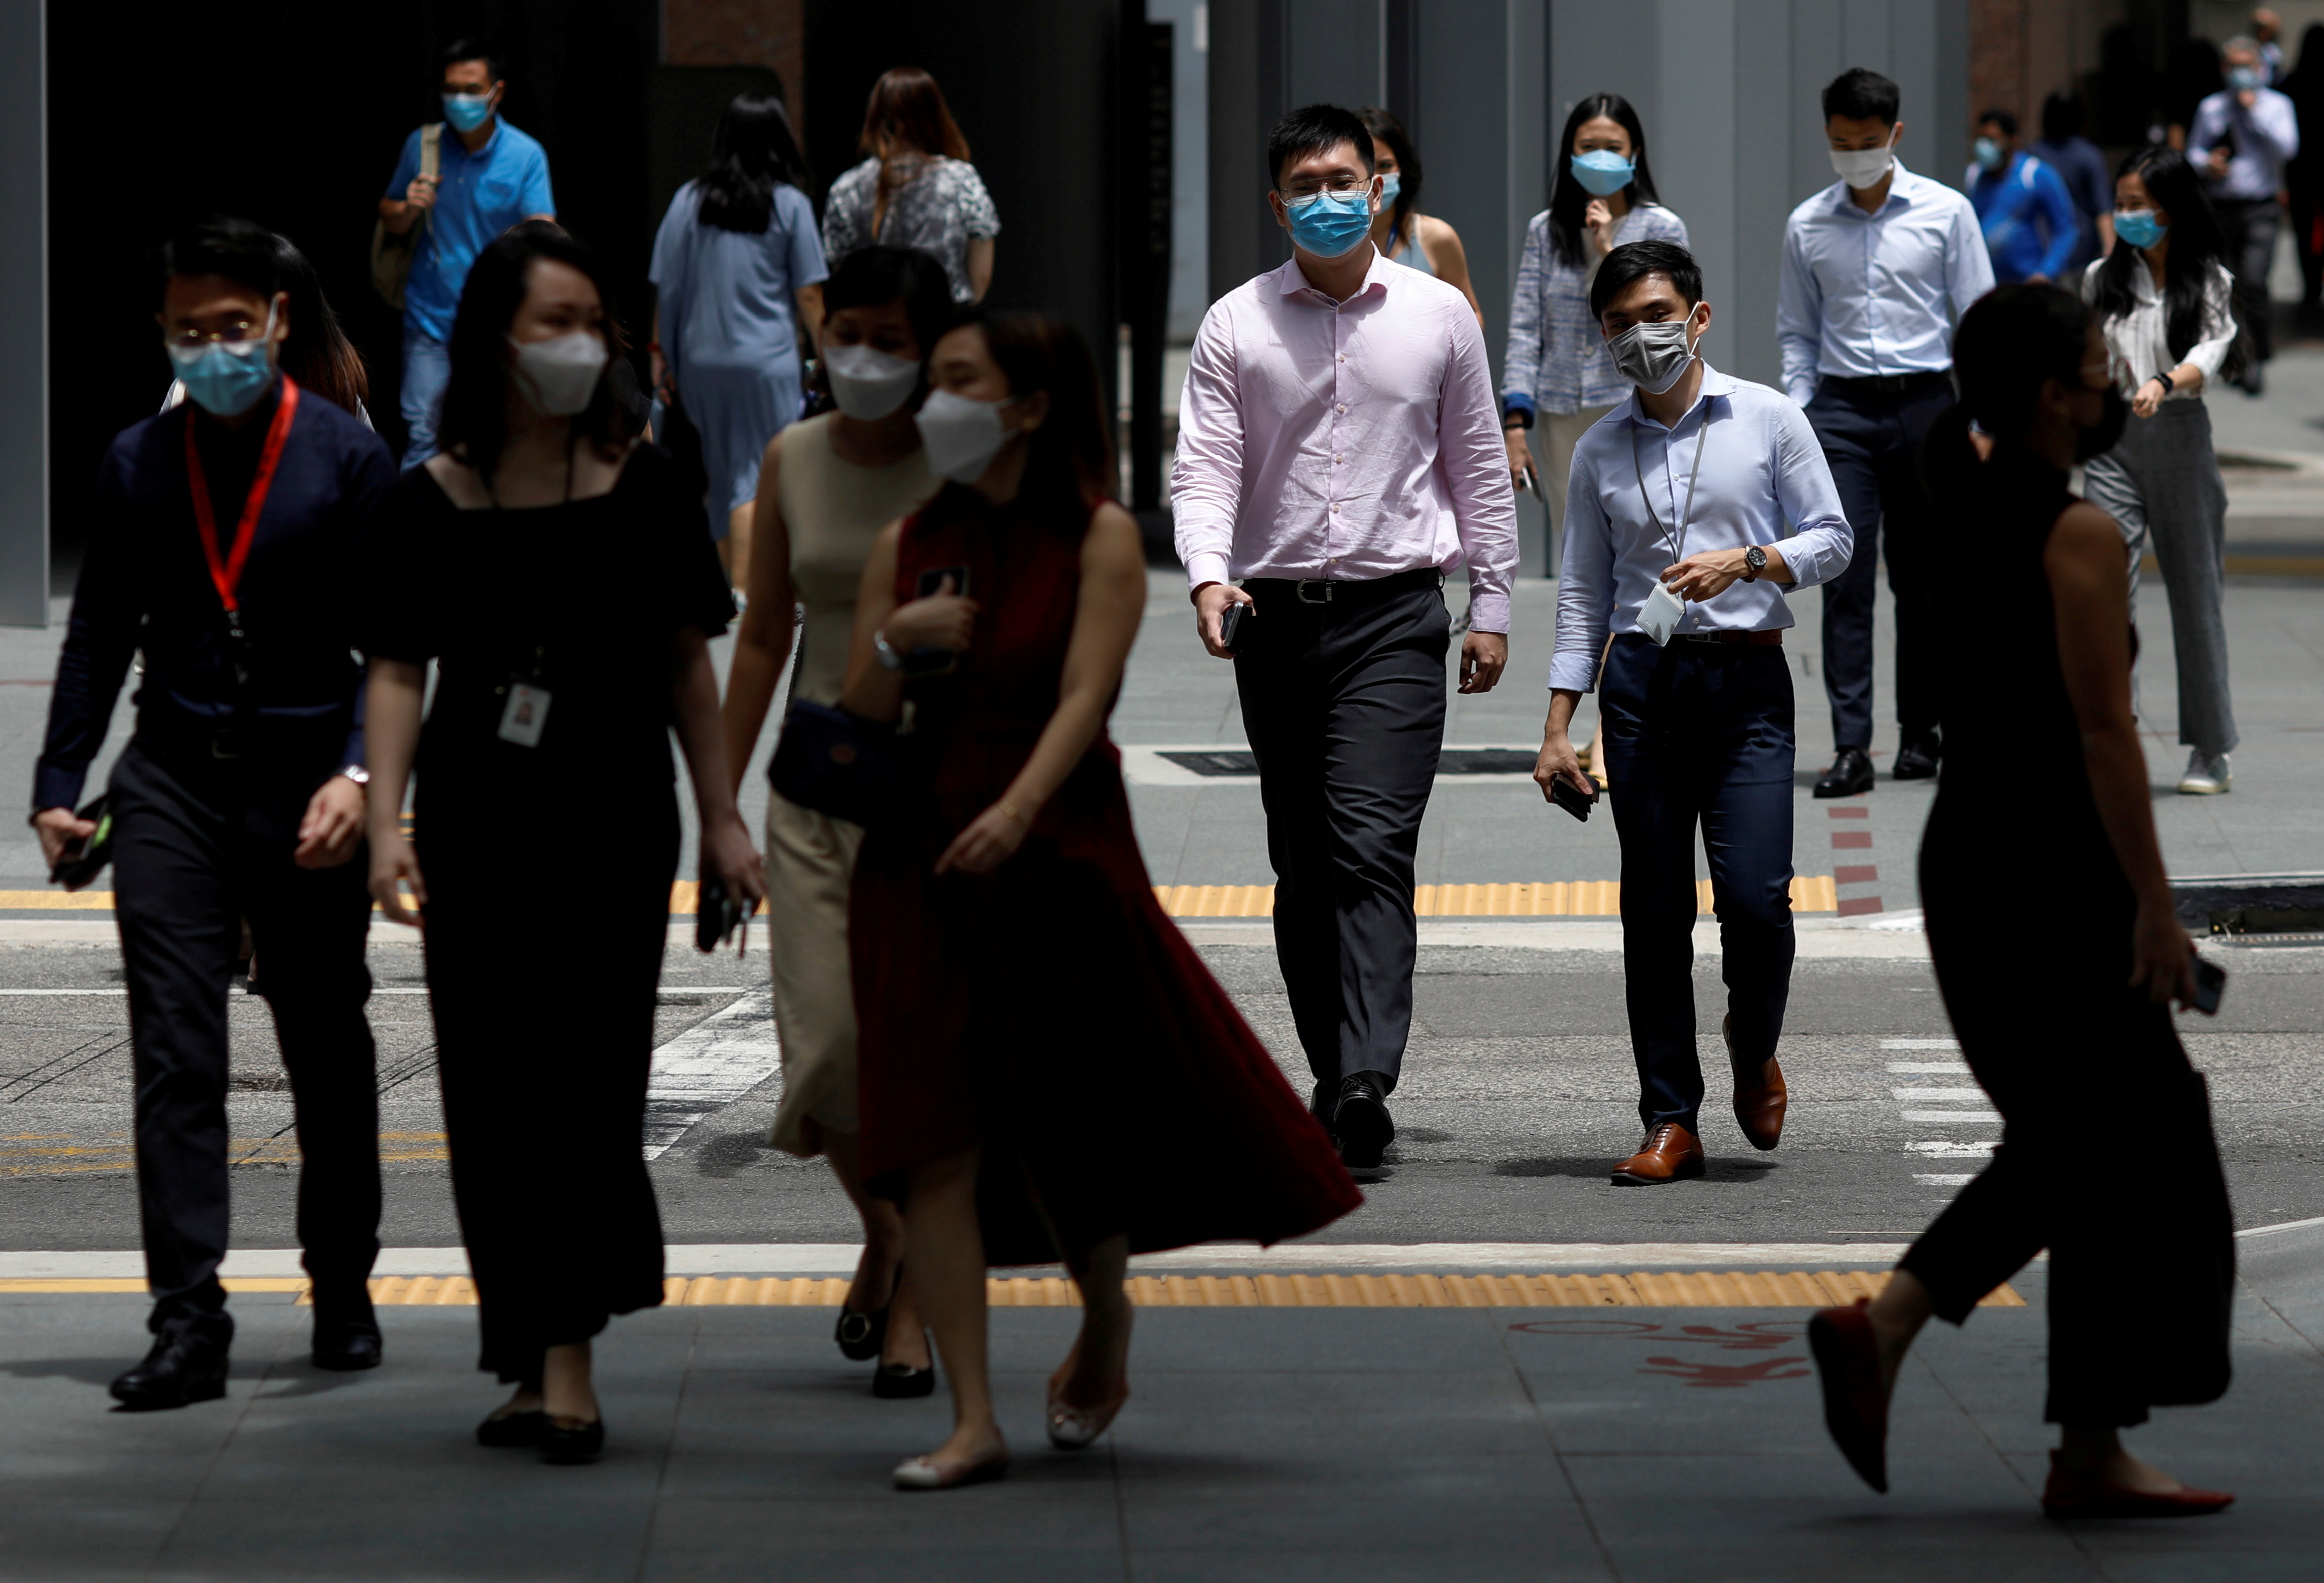 Office workers spend their lunch breaks at the central business district during the COVID-19 outbreak in Singapore